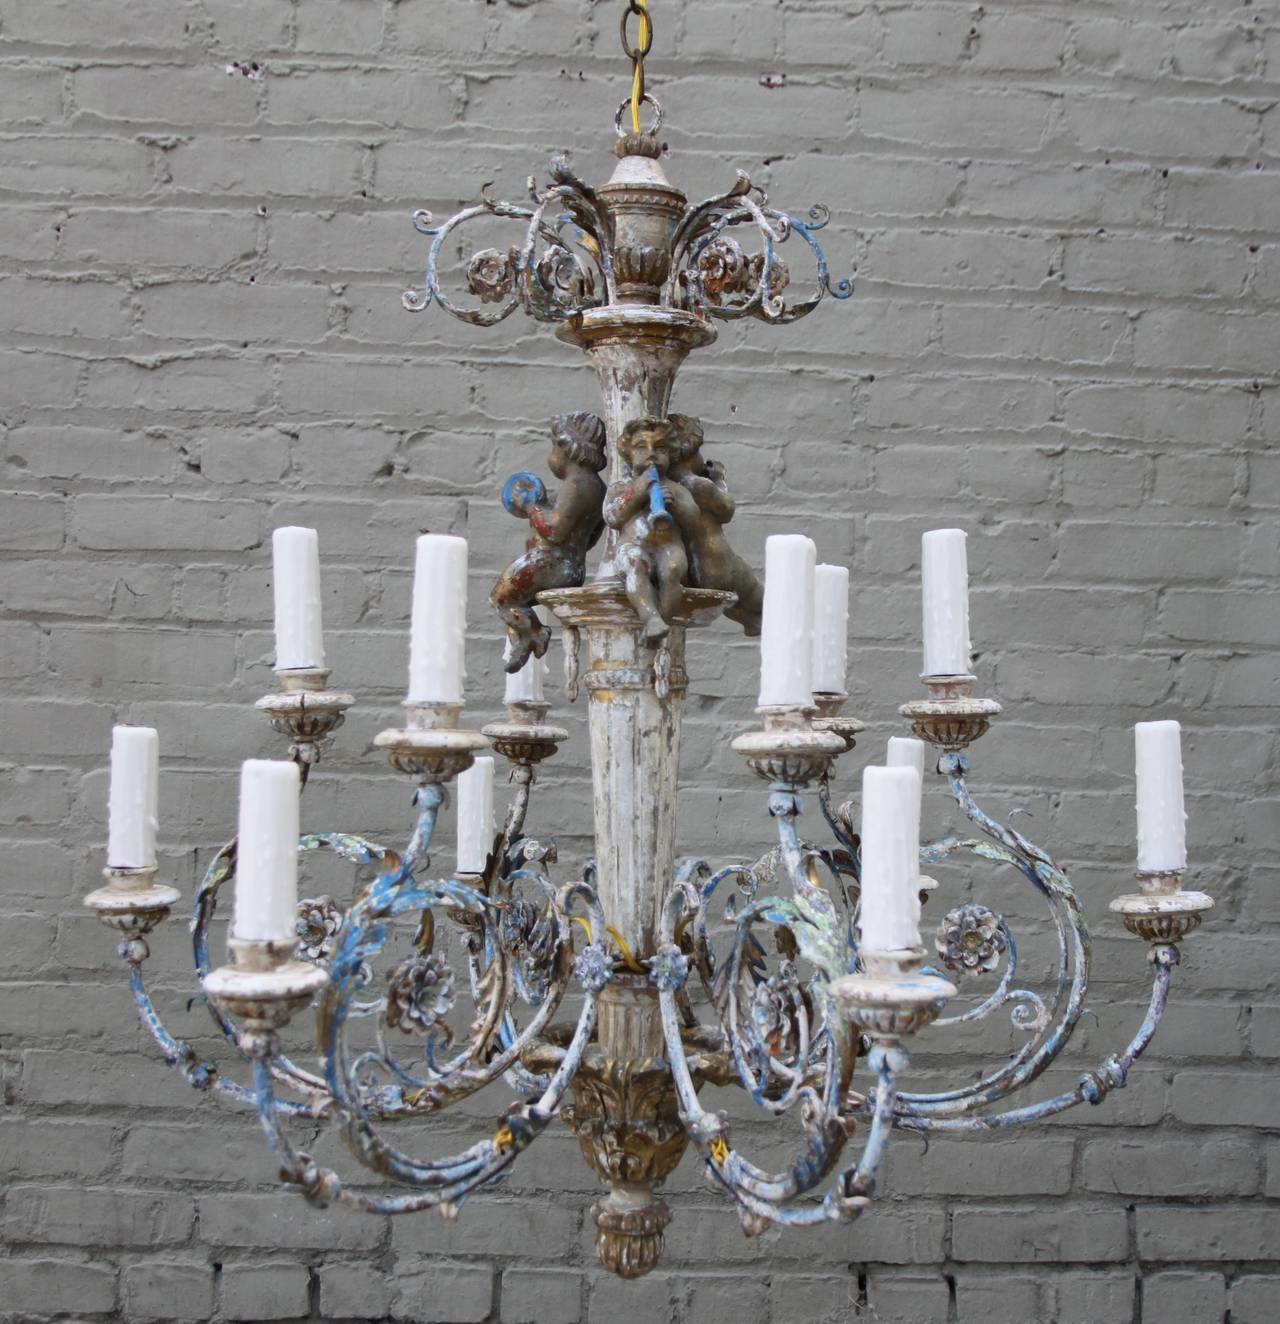 Charming twelve-light iron and wood painted chandelier depicting three cherubs playing musical instruments. The fixture has been newly wired with chain and canopy and is ready to install.